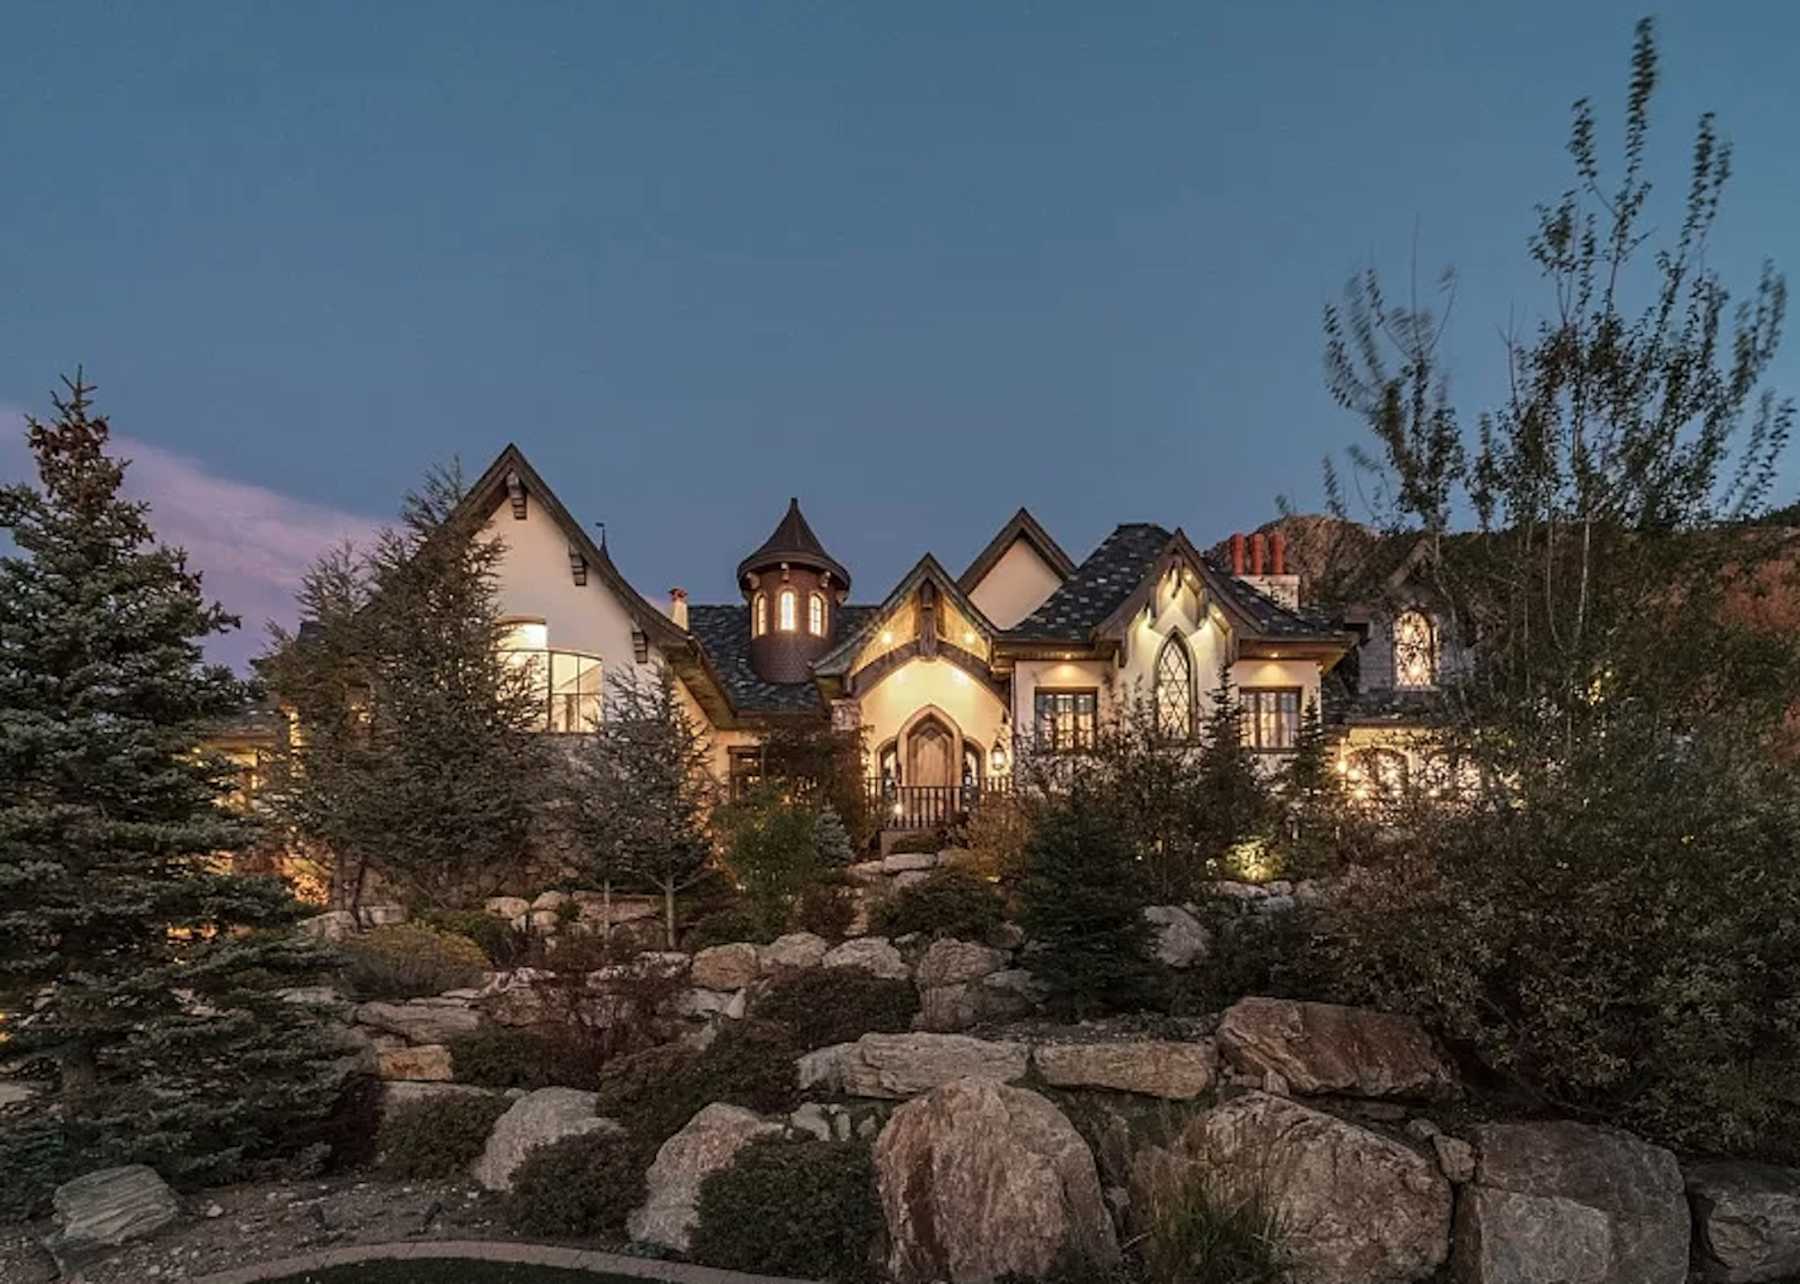 20 Utterly Insane Homes up for Sale Spotted on 'Zillow Gone Wild